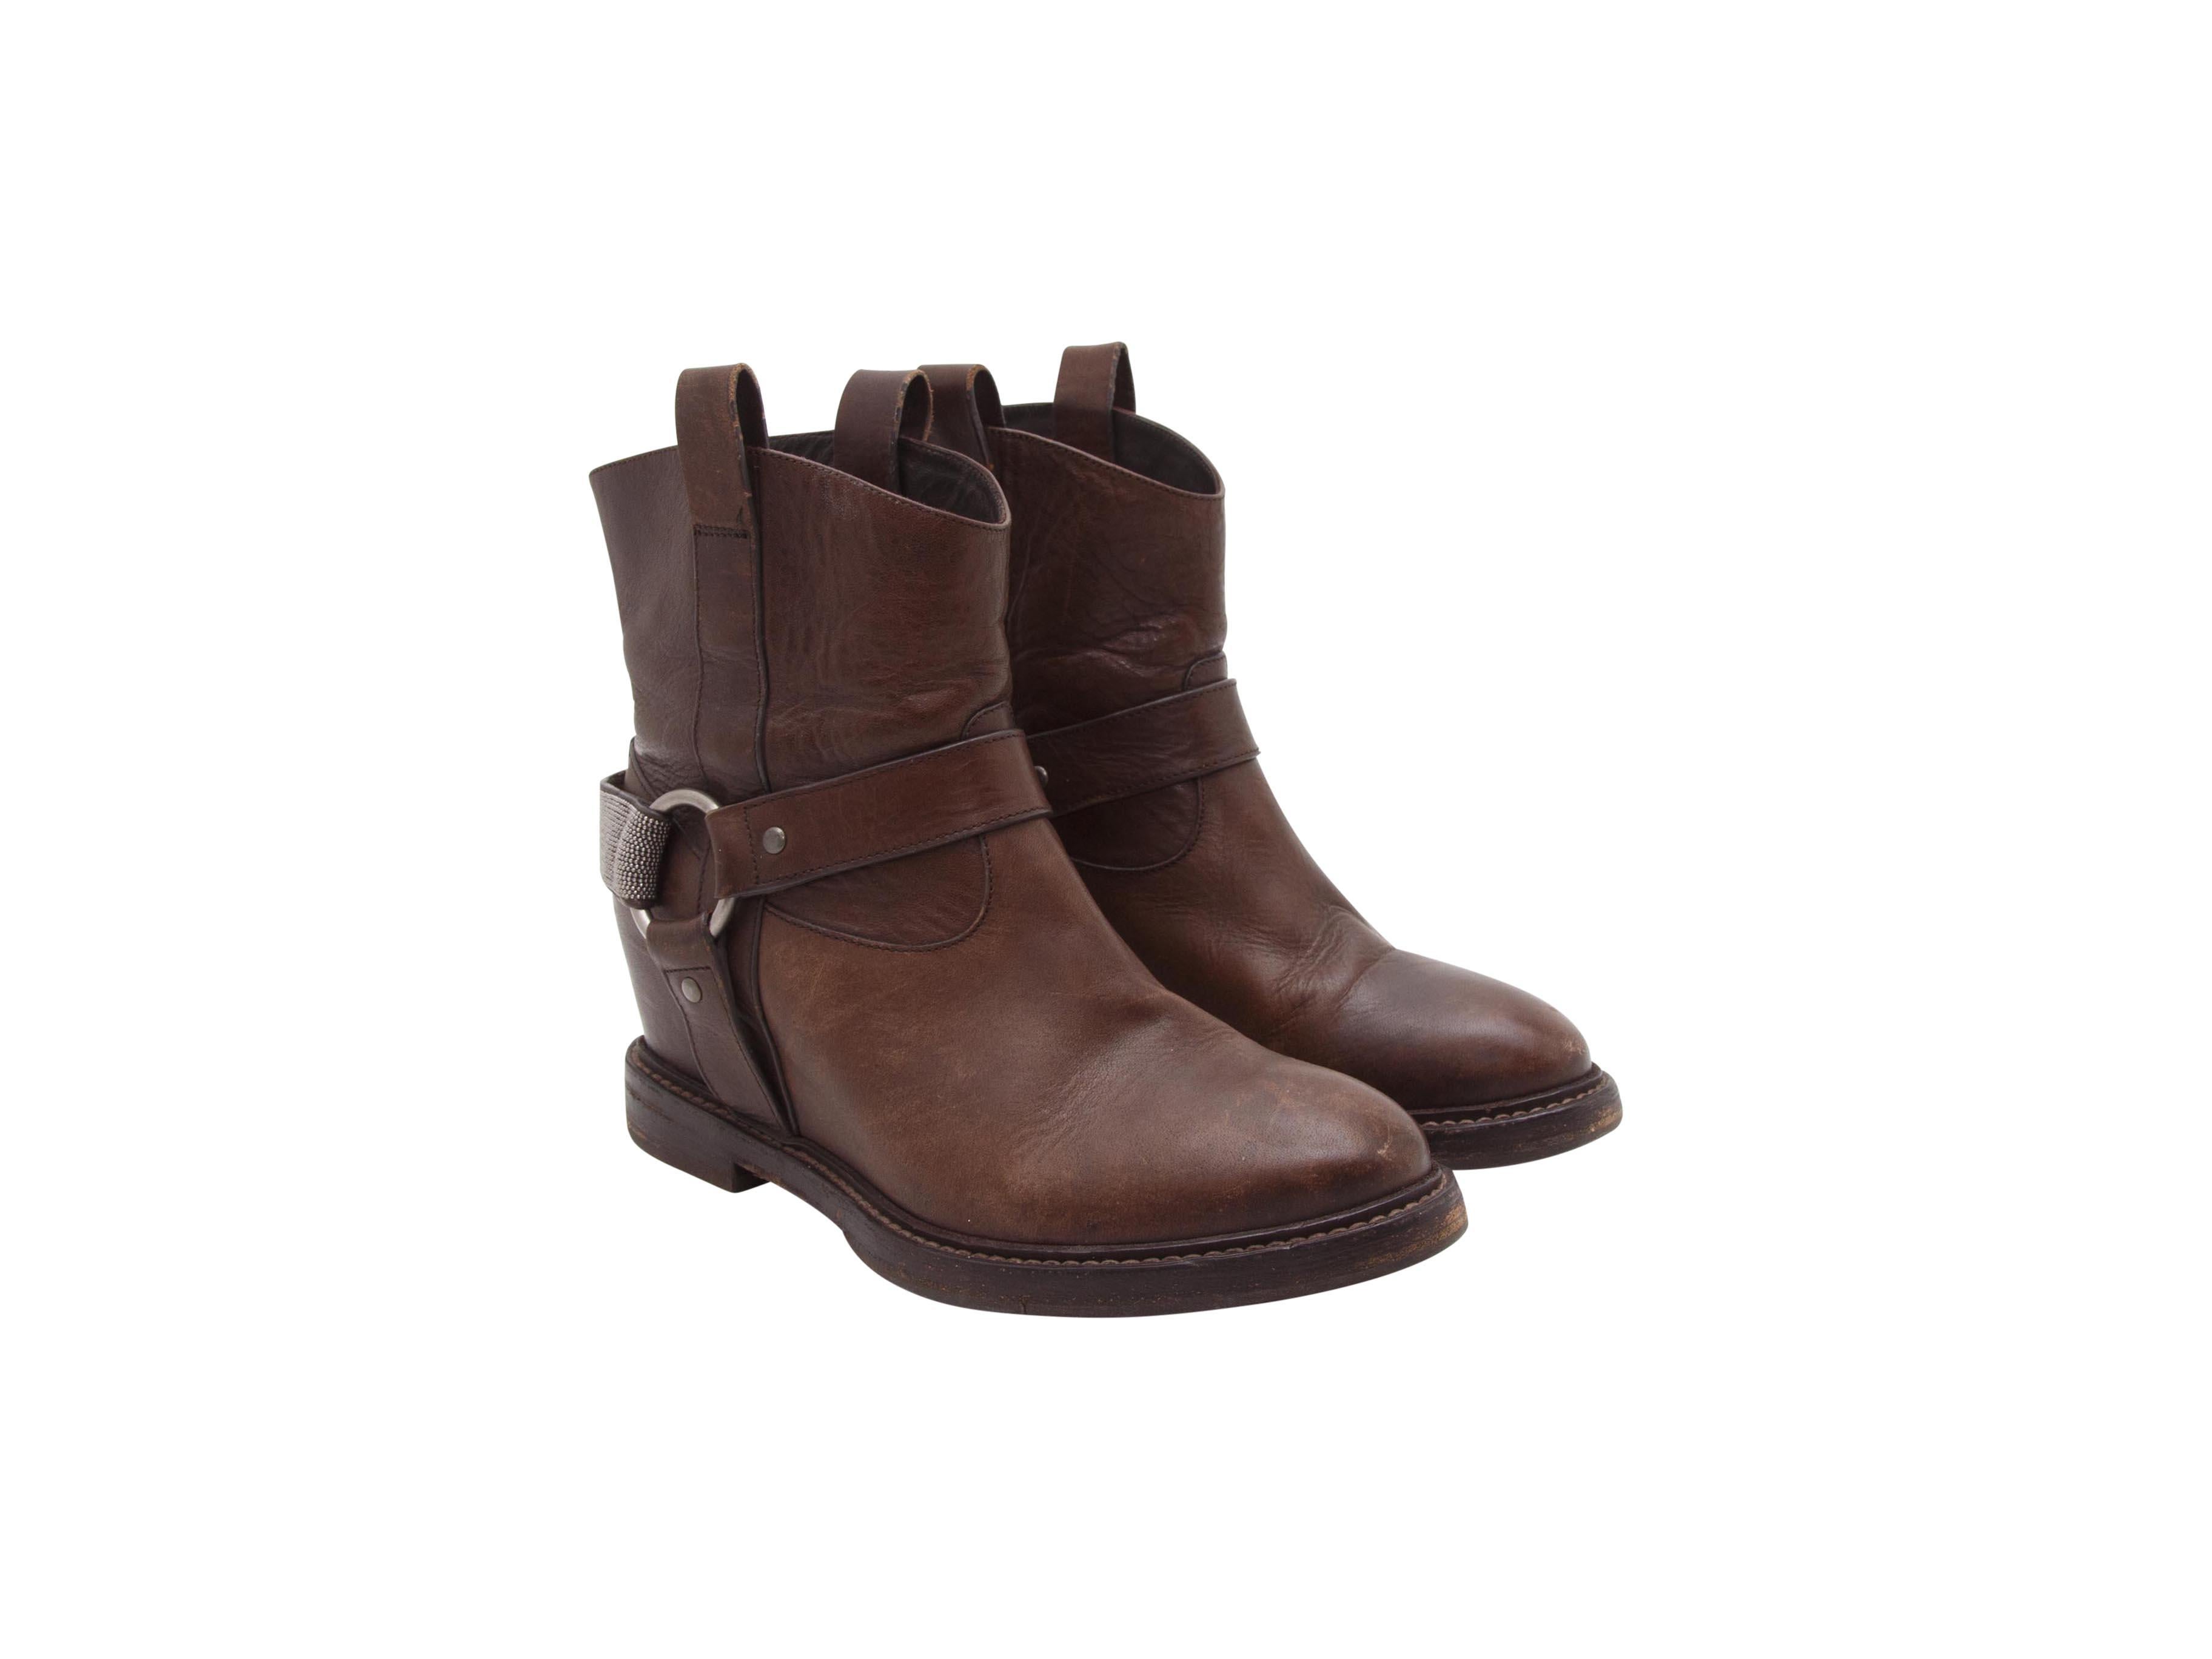 Product details:  Brown leather wedge ankle boots by Brunello Cucinelli.  Embellished Western strap detail.  Round toe.  Hidden wedge heel.  Silvertone hardware.  1